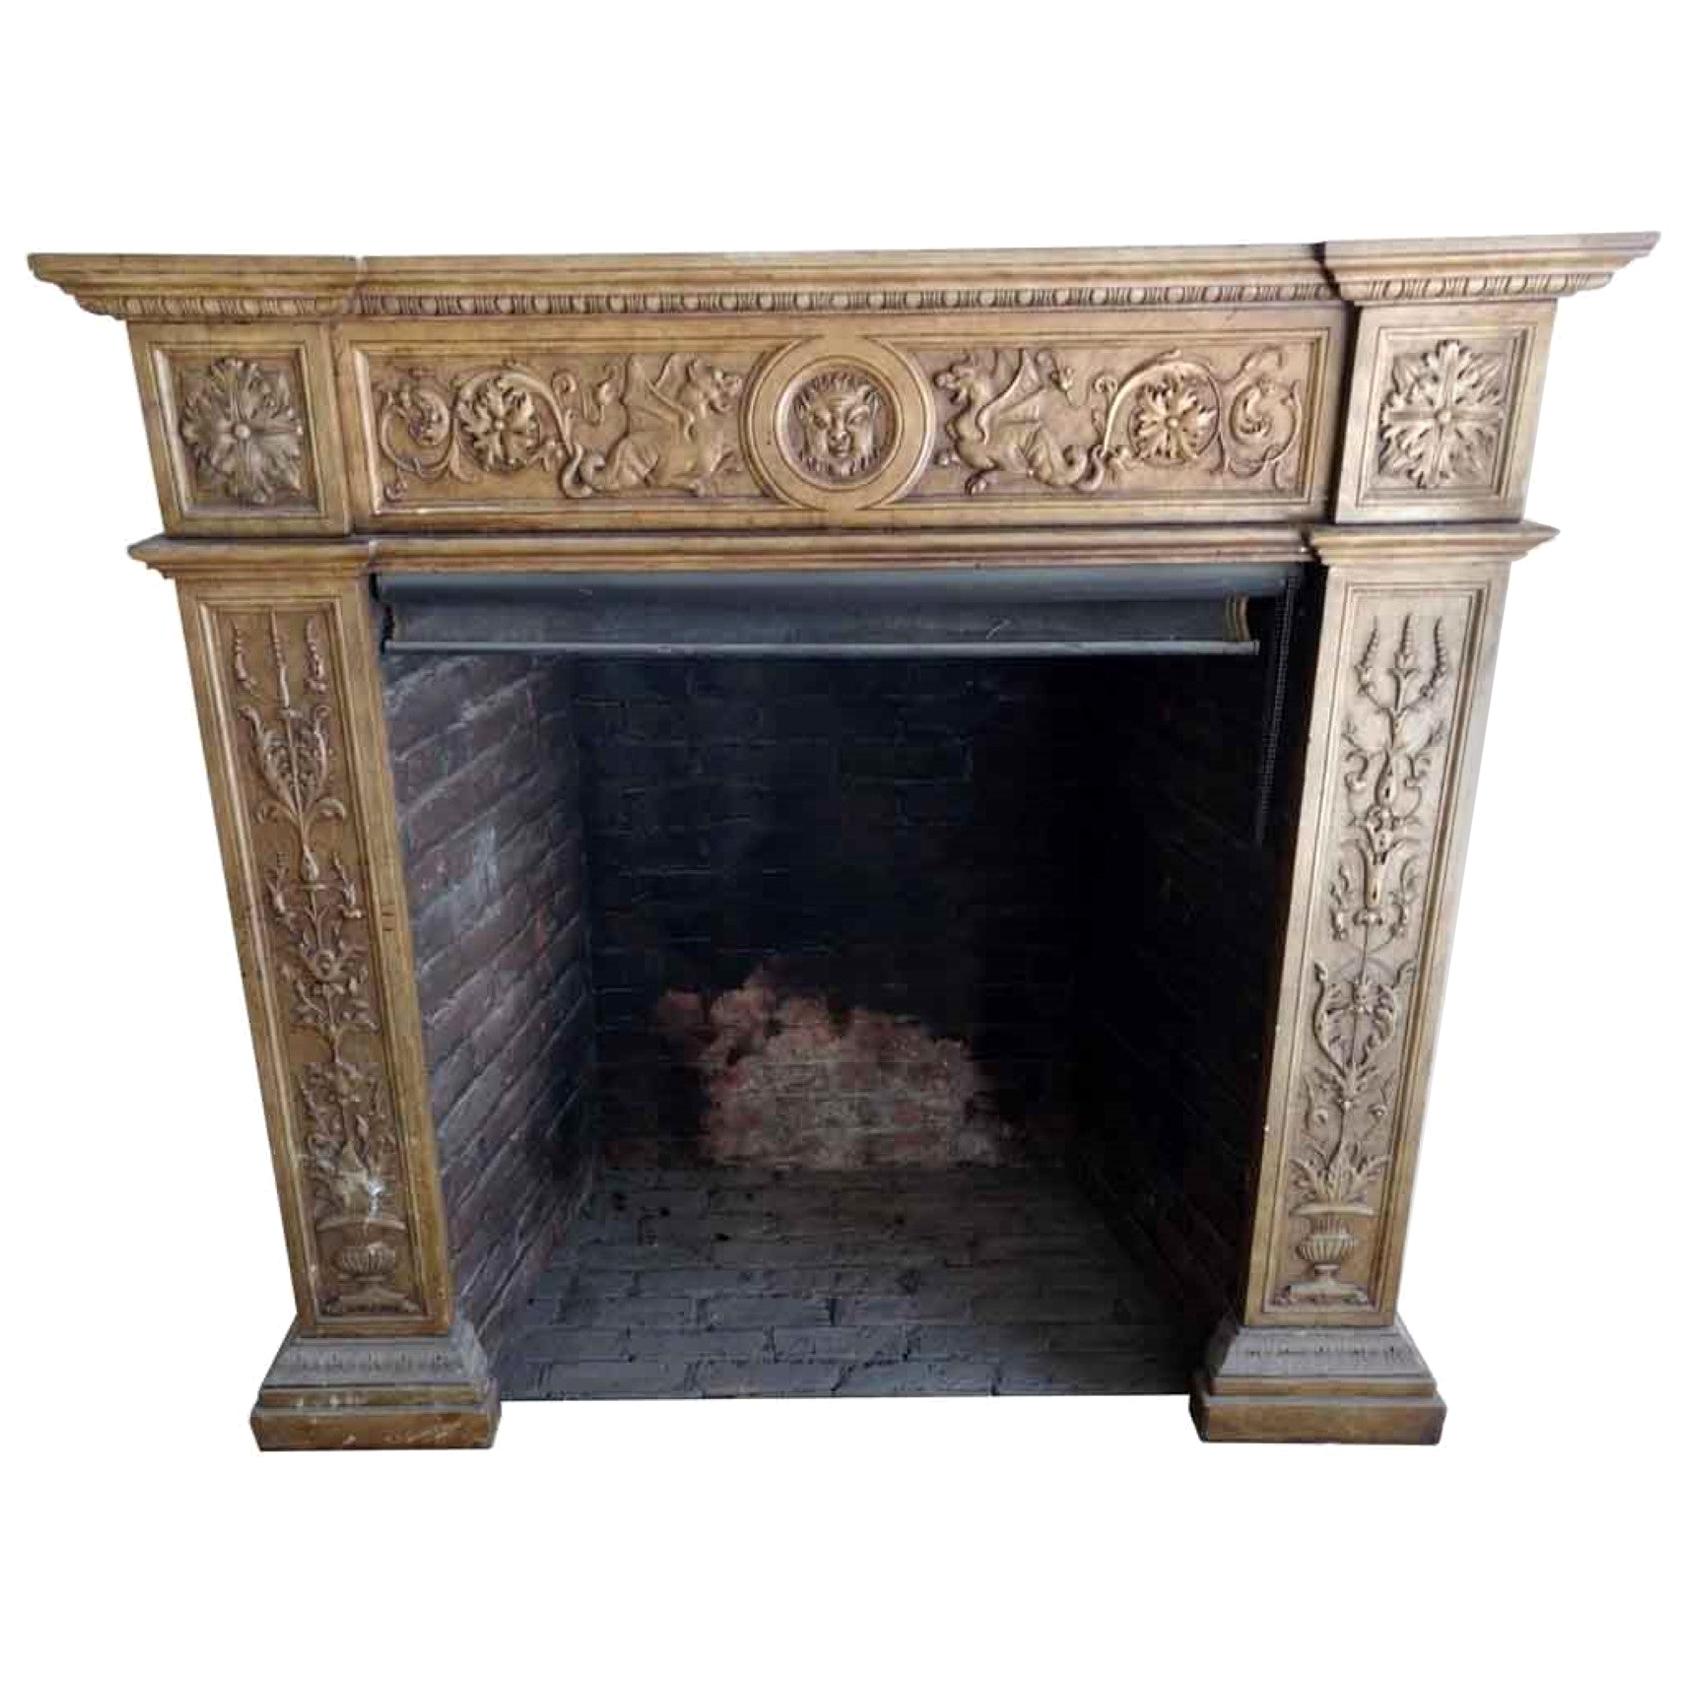 This late 1800s Gothic style fireplace mantel is made of carved gray Carrara marble that has been painted tan. There are floral details with griffins and a face at the center, egg and dart detailing below the shelf, and urns at the base of the front